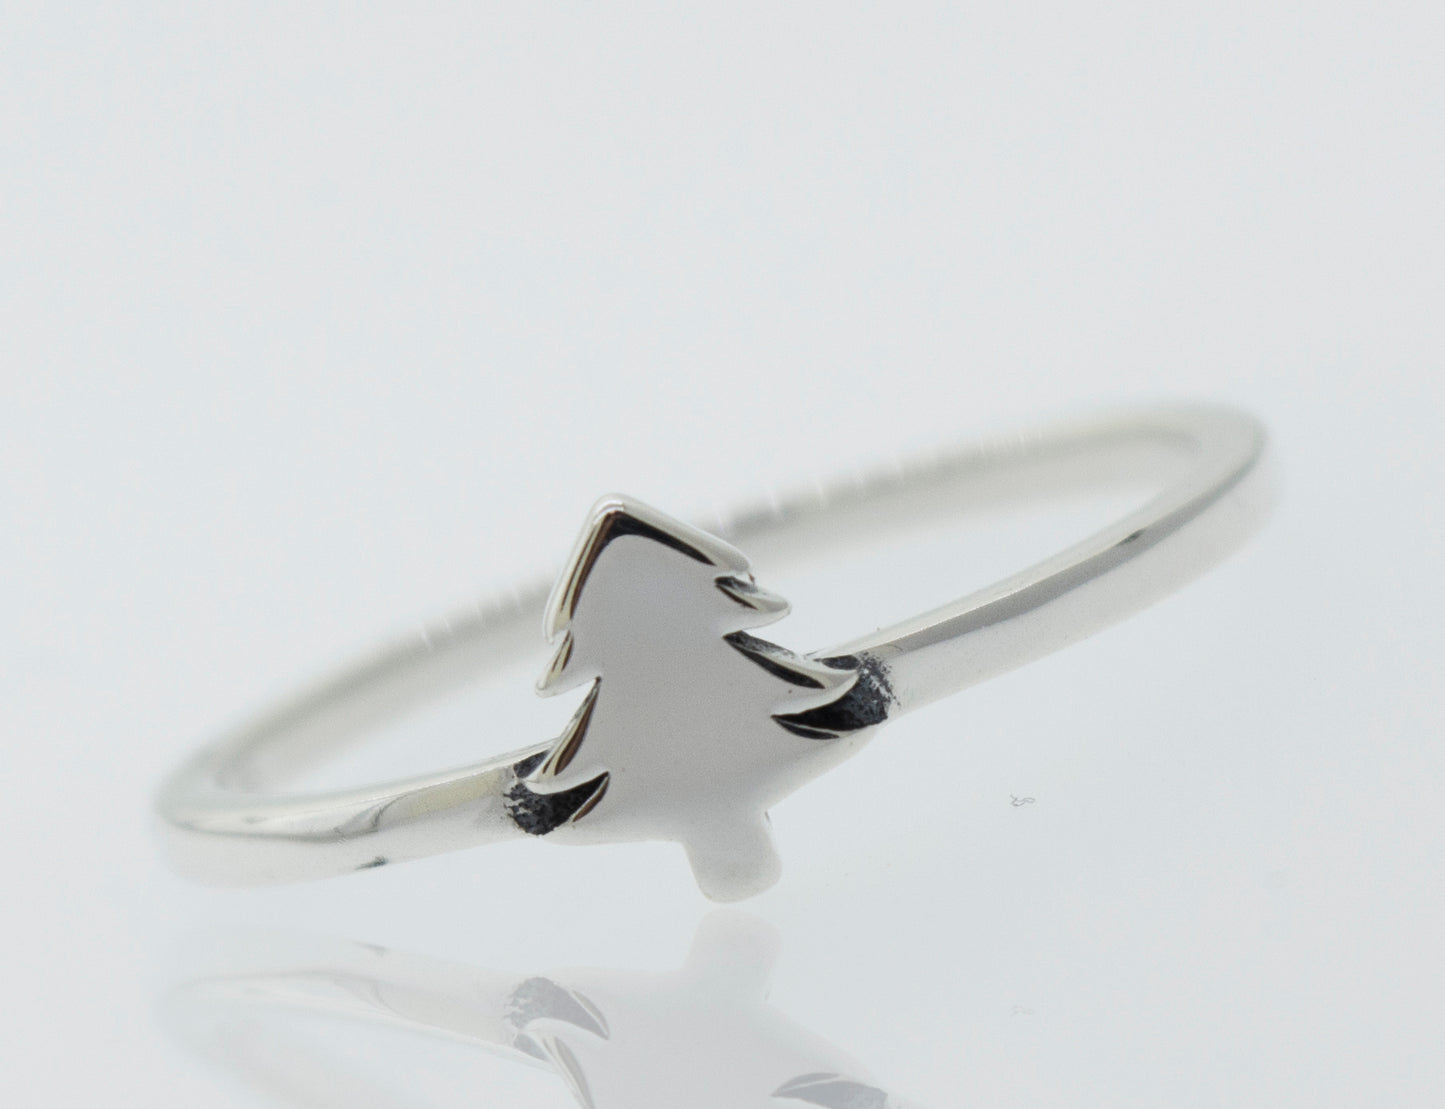 A Silver Tree Ring, showcasing the beauty of nature.